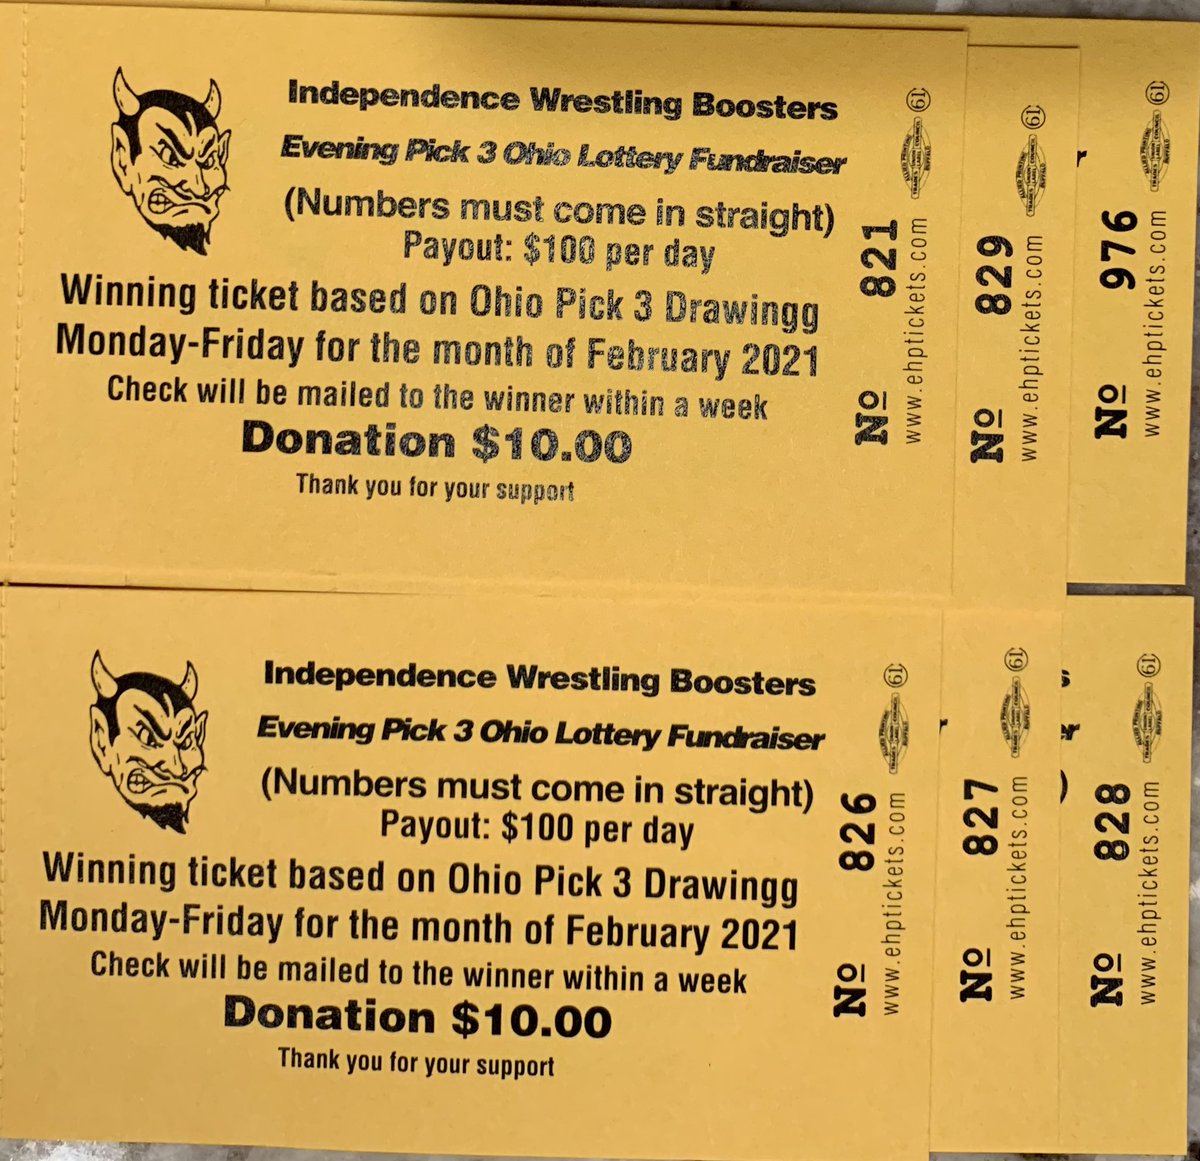 No luck with Powerball or Mega-millions? Try your luck with the Indy Wrestling Boosters lottery raffle. Winners based on the Ohio lotto pick 3 on Monday-Friday evening throughout February. $10 a ticket, Venmo accepted. I have 6 numbers left. https://t.co/QME8iYNt3l